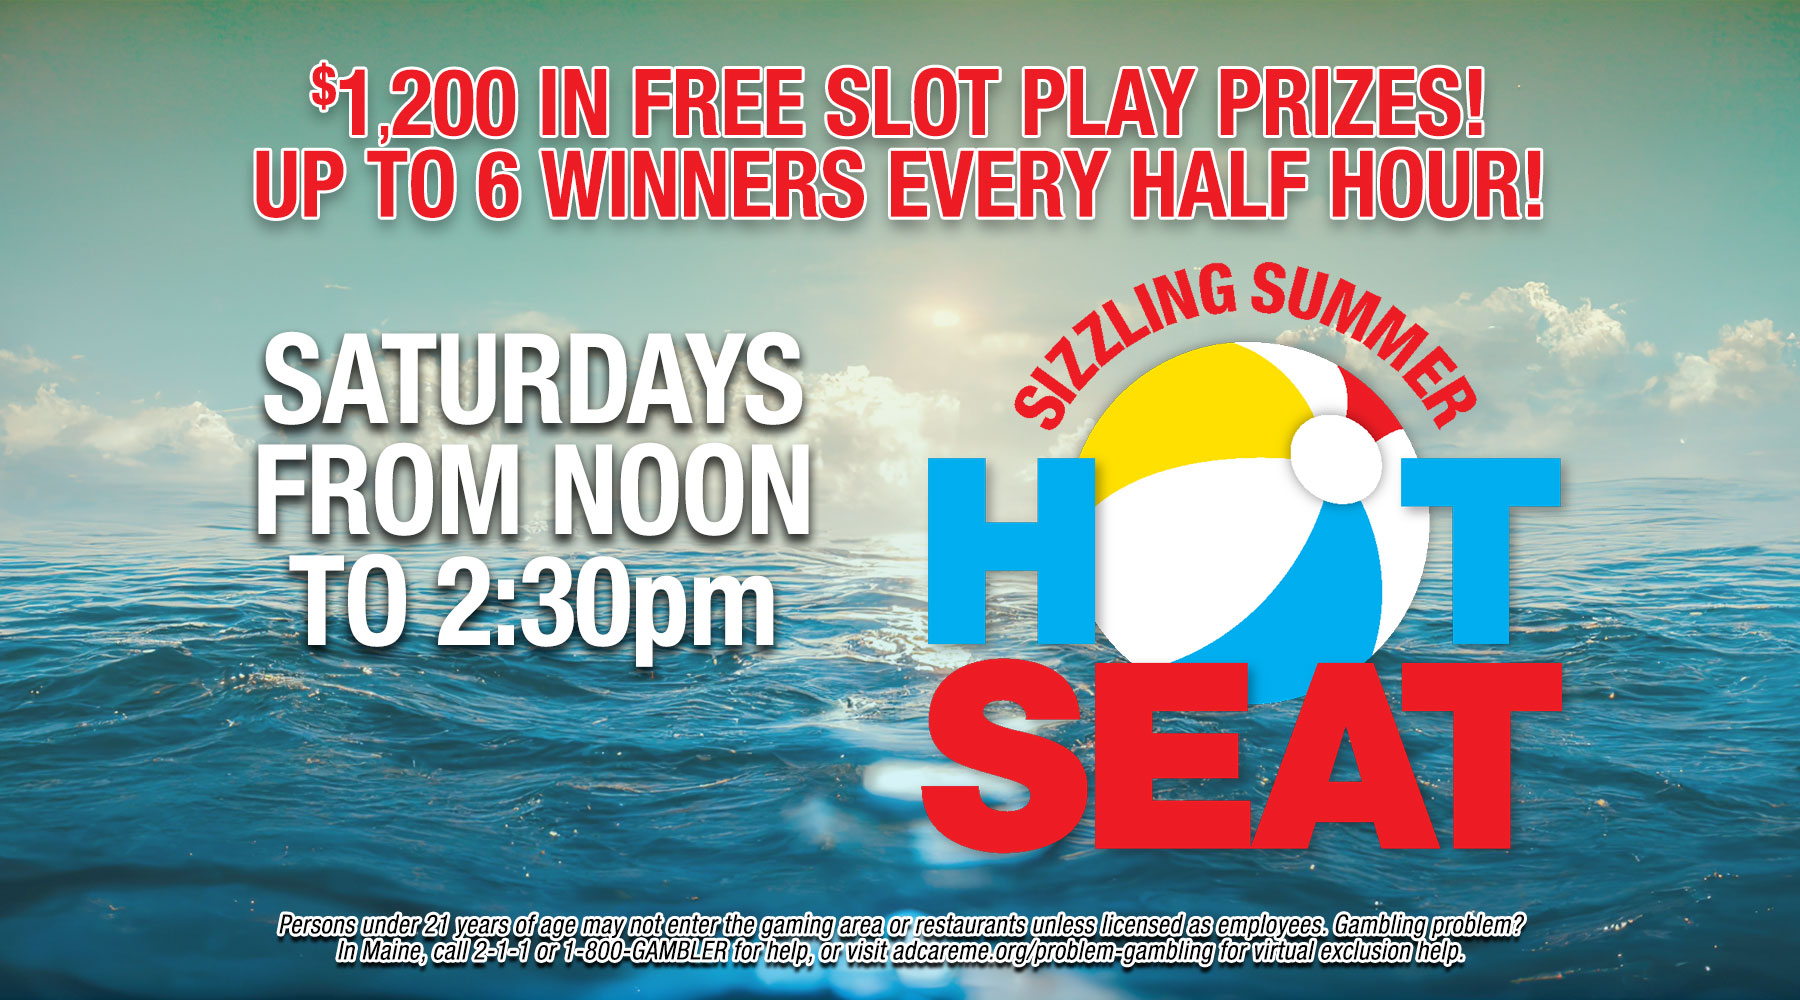 Sizzling Summer Hot Seat promotion at oxford casino hotel